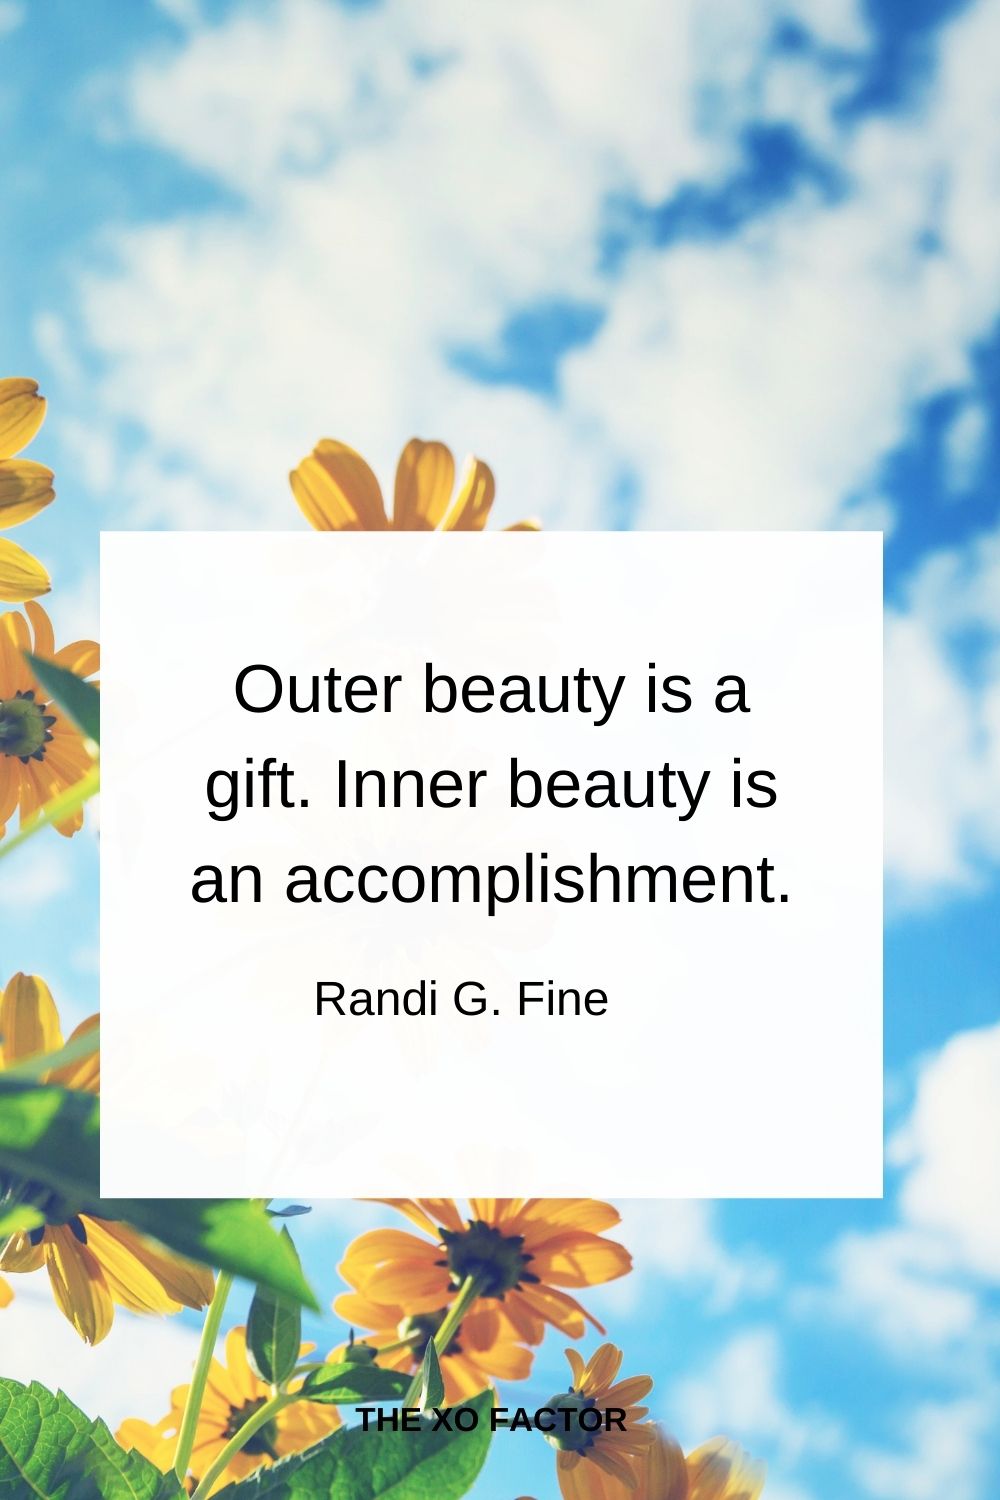 Outer beauty is a gift. Inner beauty is an accomplishment.  Randi G. Fine